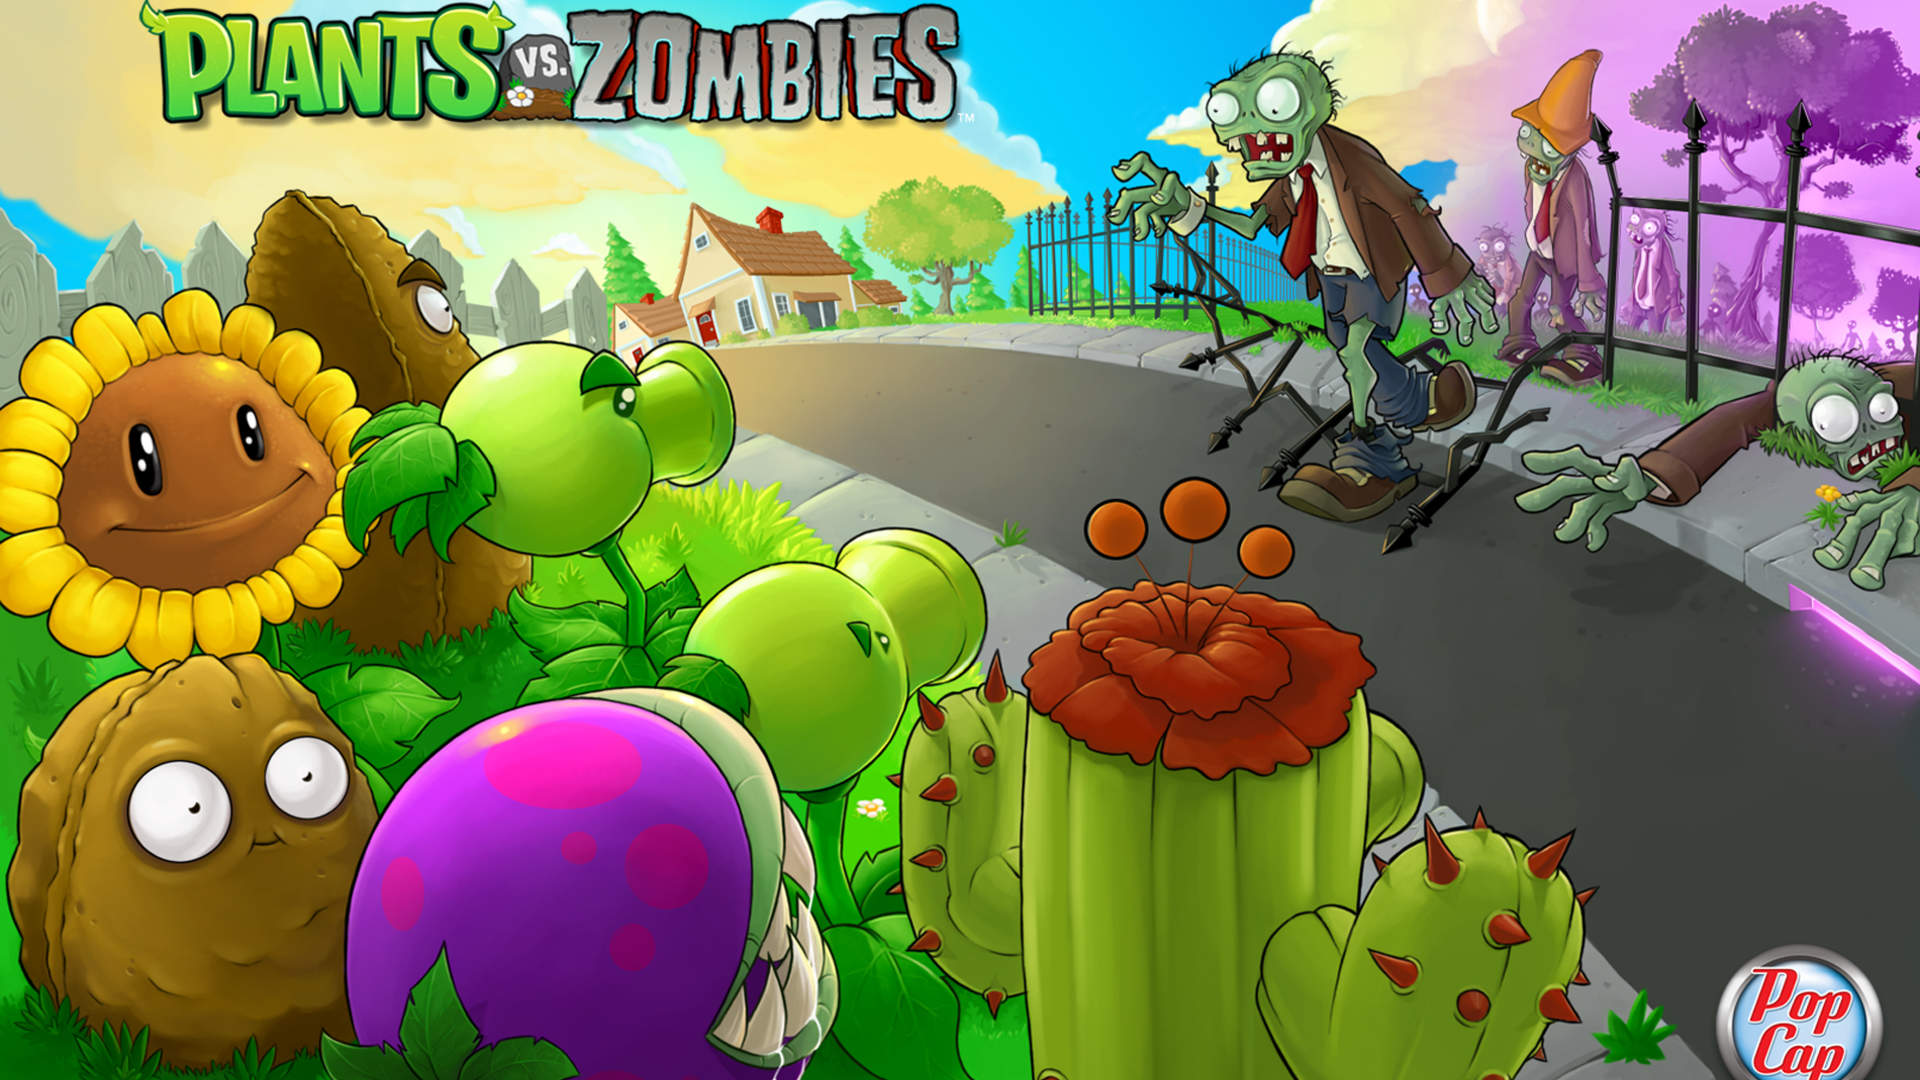 How Plants Vs. Zombies 2 Works As A Free To Play Game